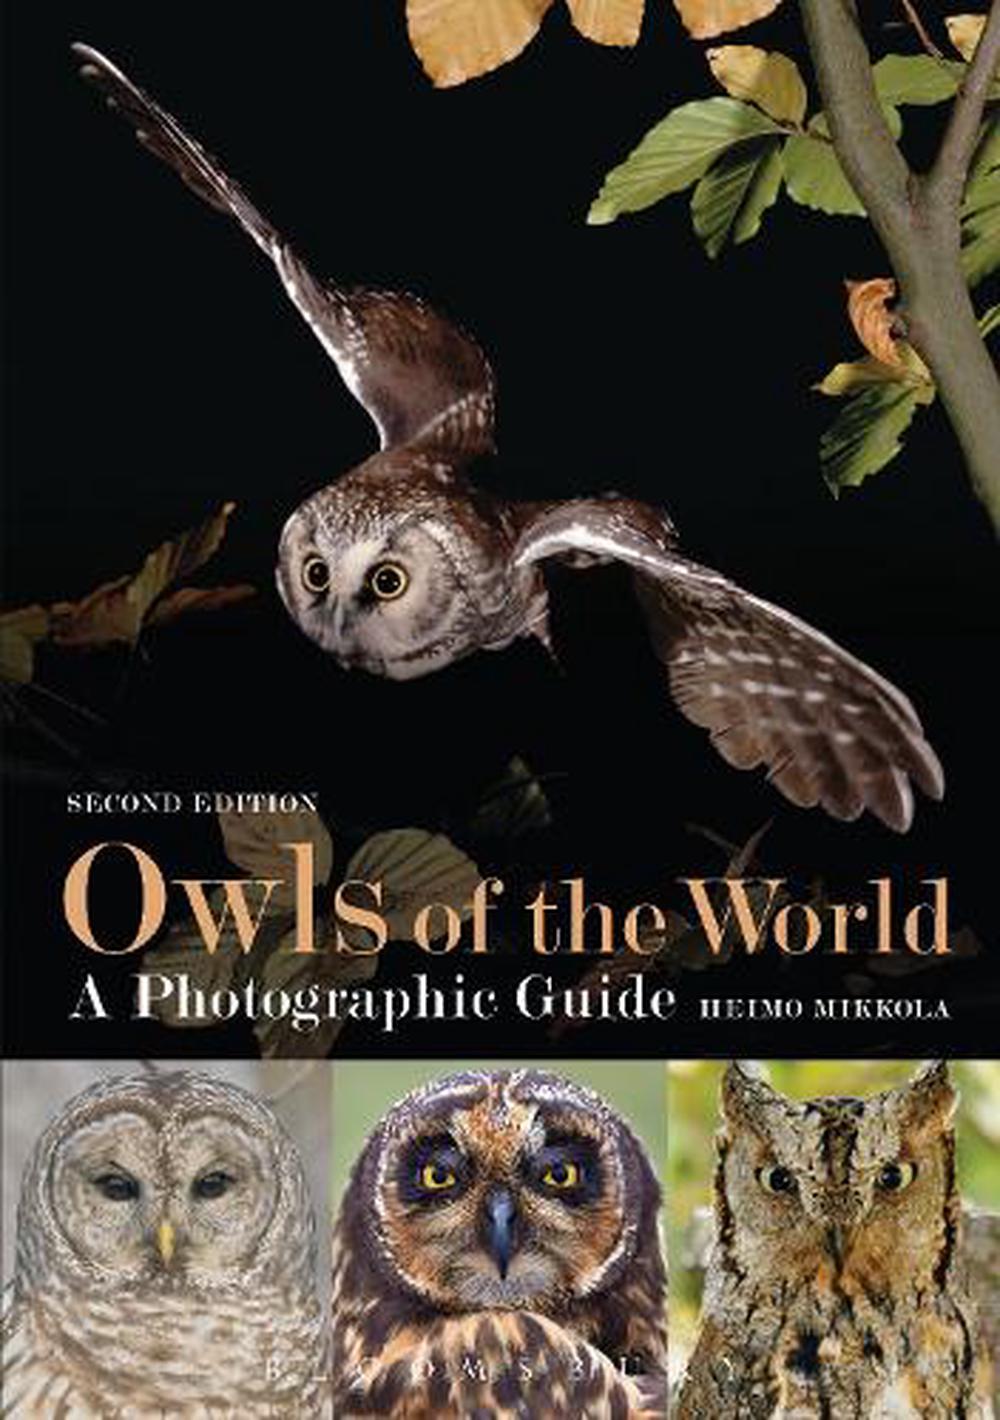 Owls of the World A Photographic Guide Second Edition by Heimo